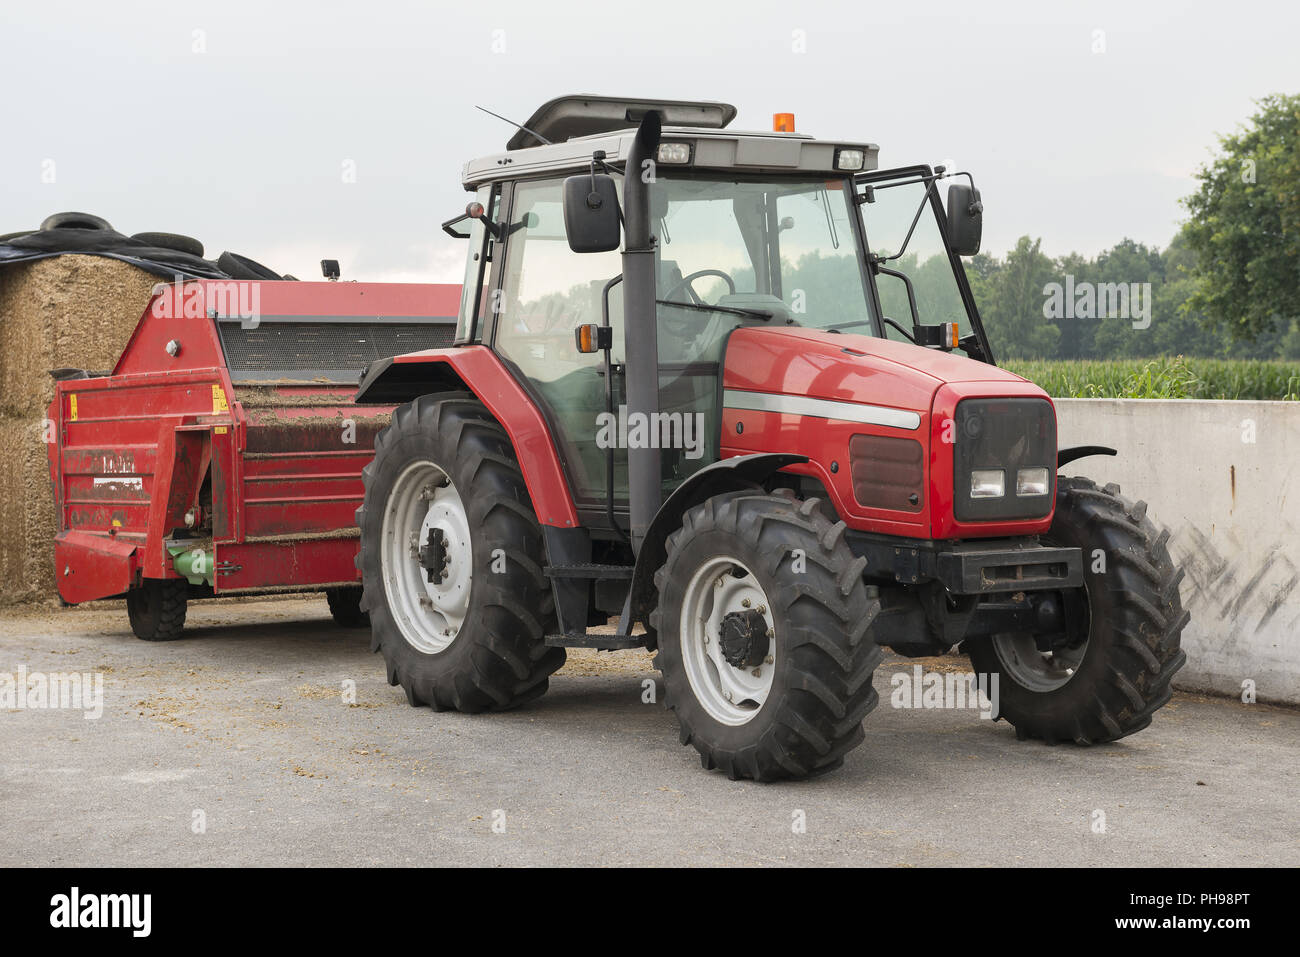 Red tractor with red cattle feed diffuser Stock Photo